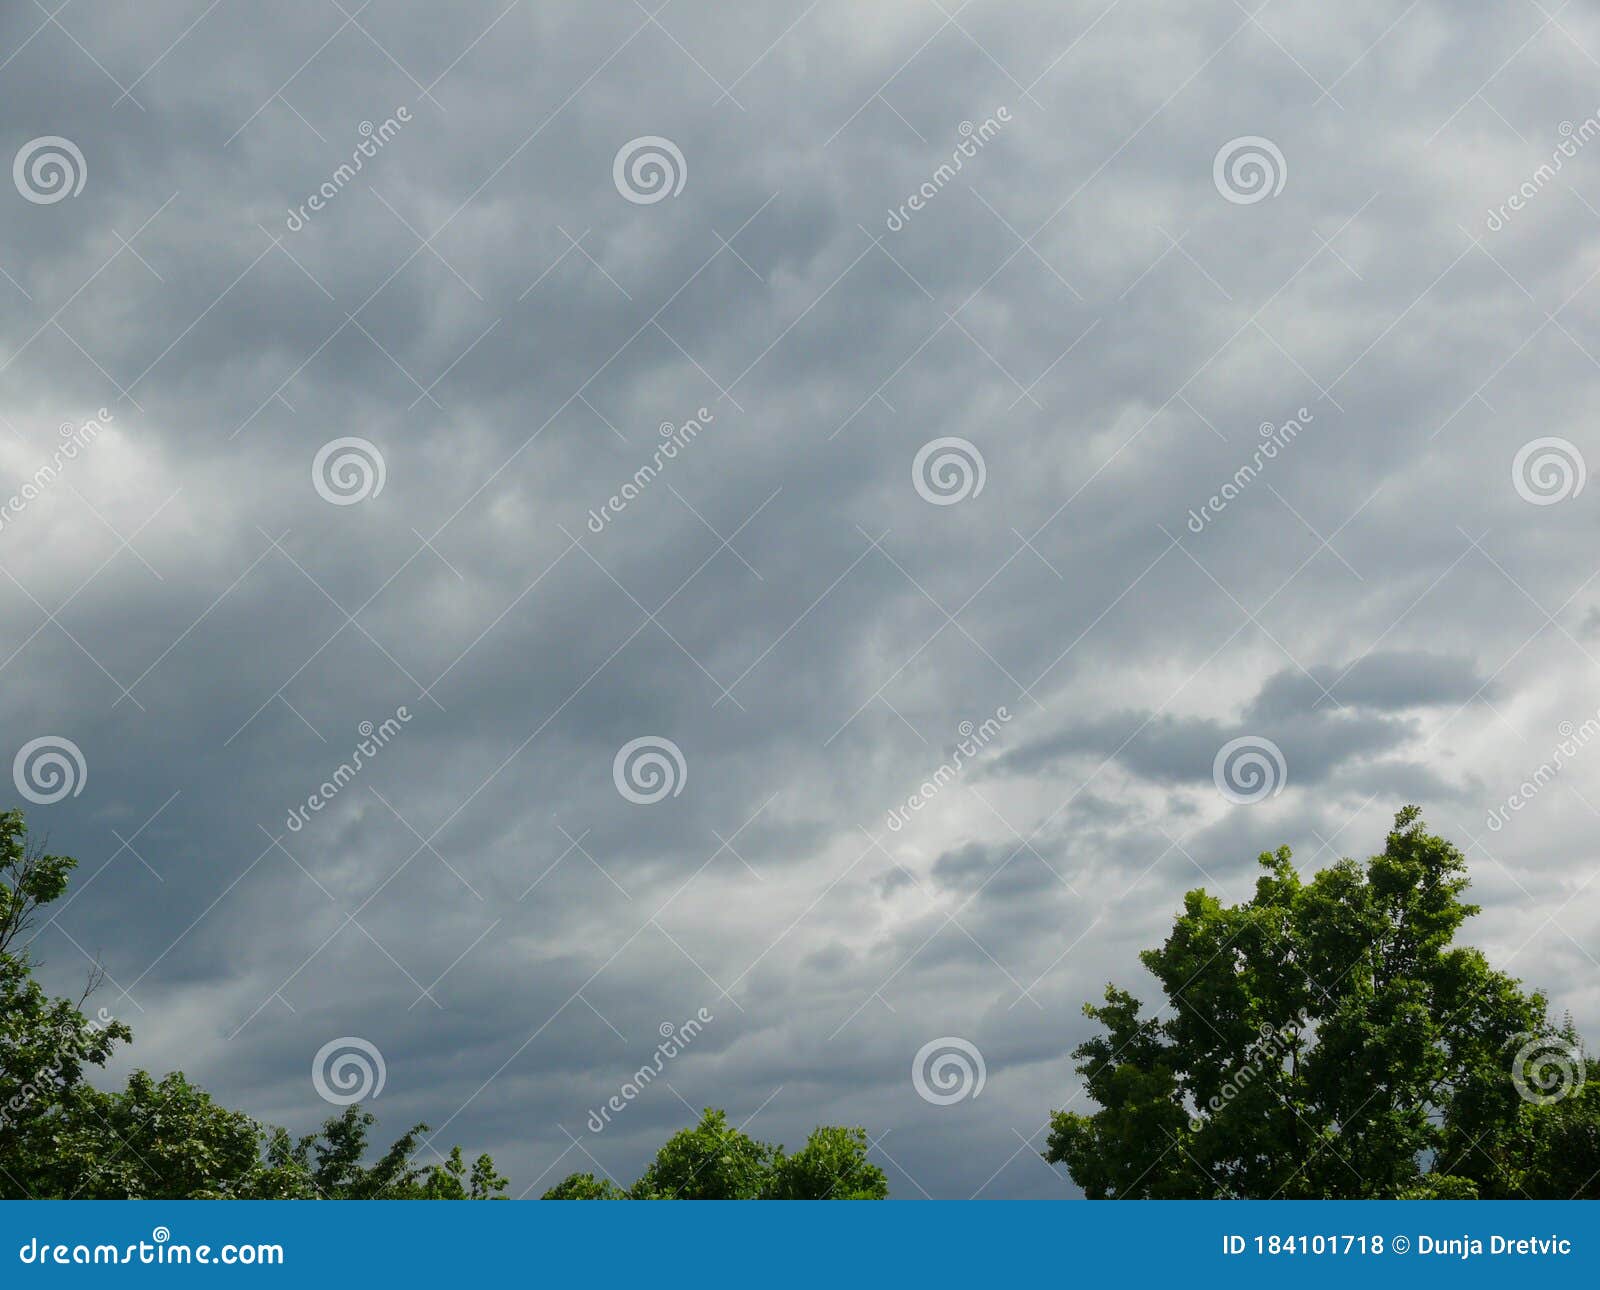 1 5 Overcast Sky Photos Free Royalty Free Stock Photos From Dreamstime